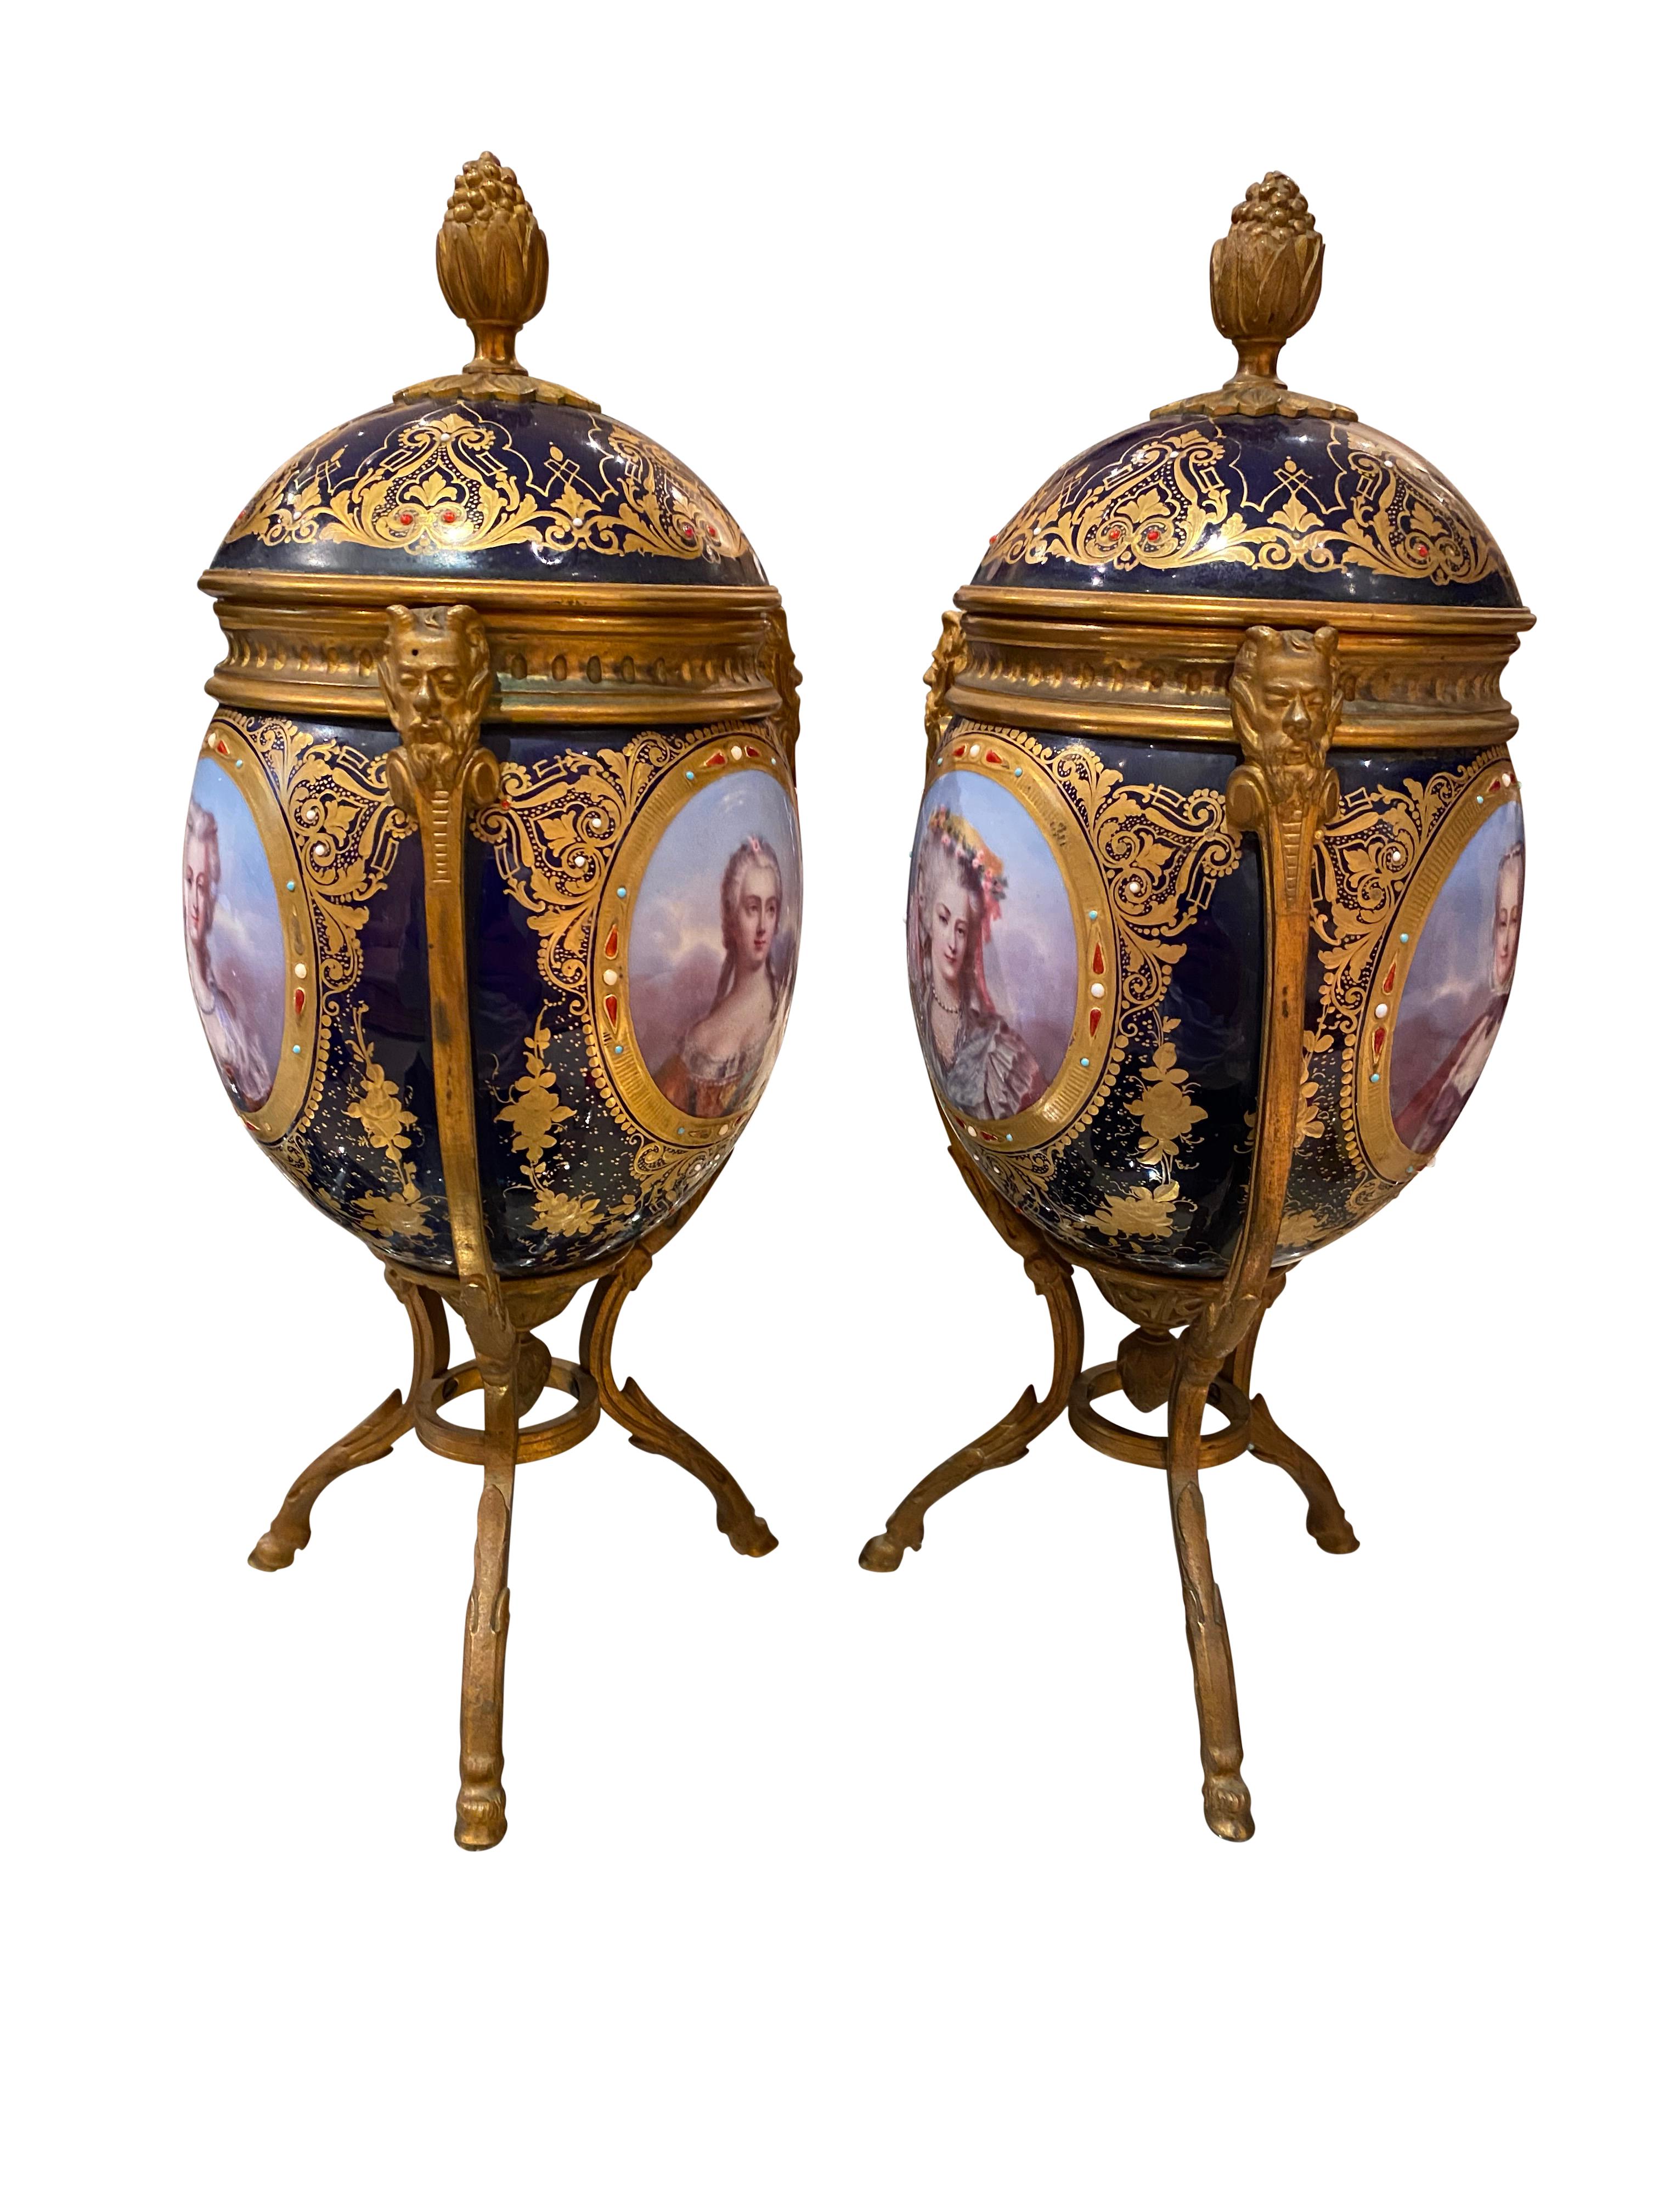 Antique Pair of ‘Sèvres’ Style Ormolu Mounted Vases and Covers, 1860 For Sale 1